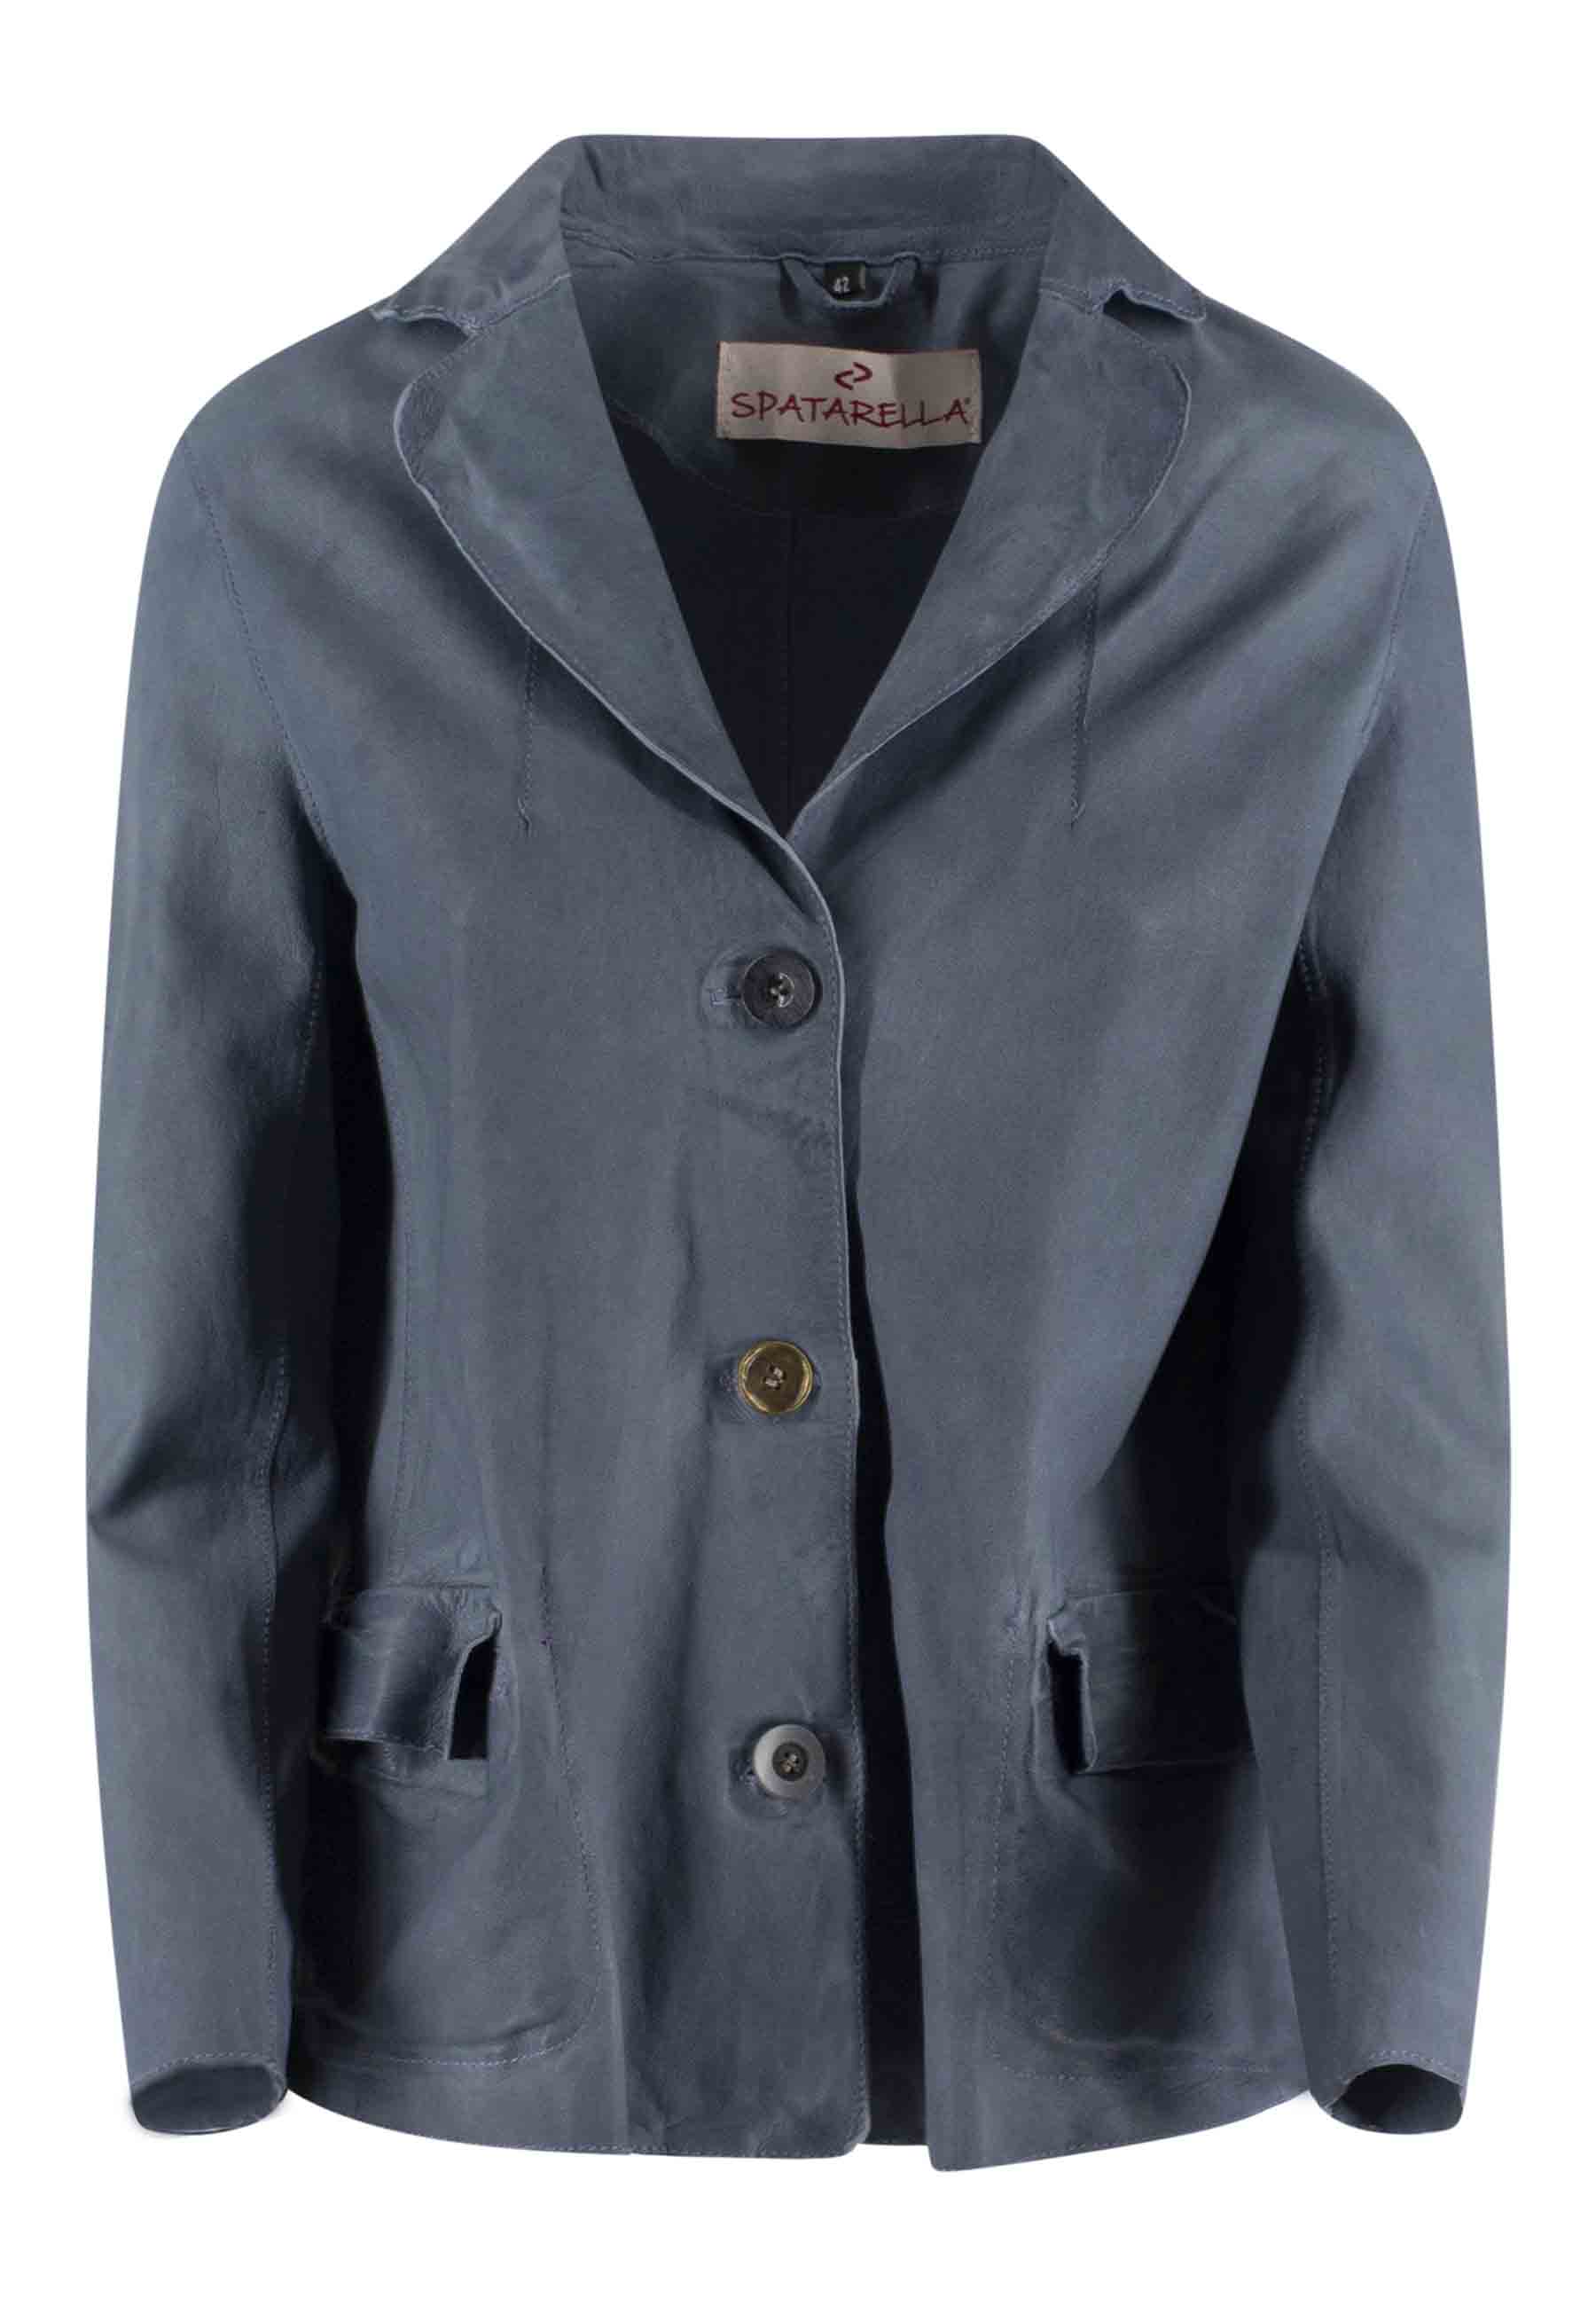 Women's jacket in light blue unlined leather with 3 buttons